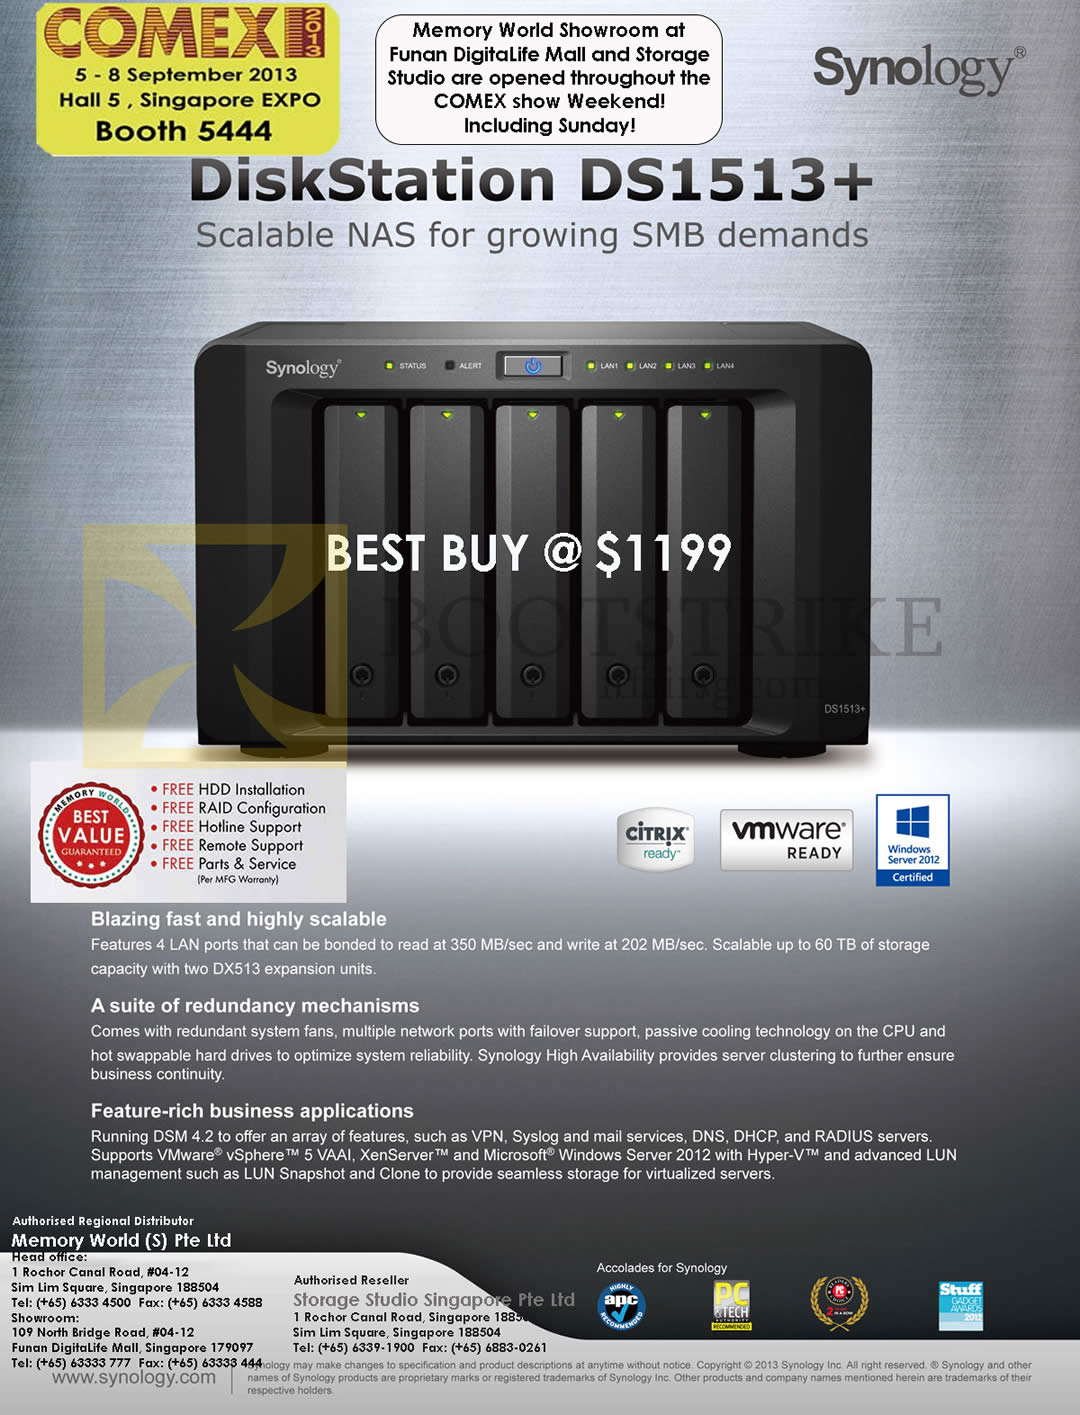 COMEX 2013 price list image brochure of Synology NAS DiskStation DS1513 Plus